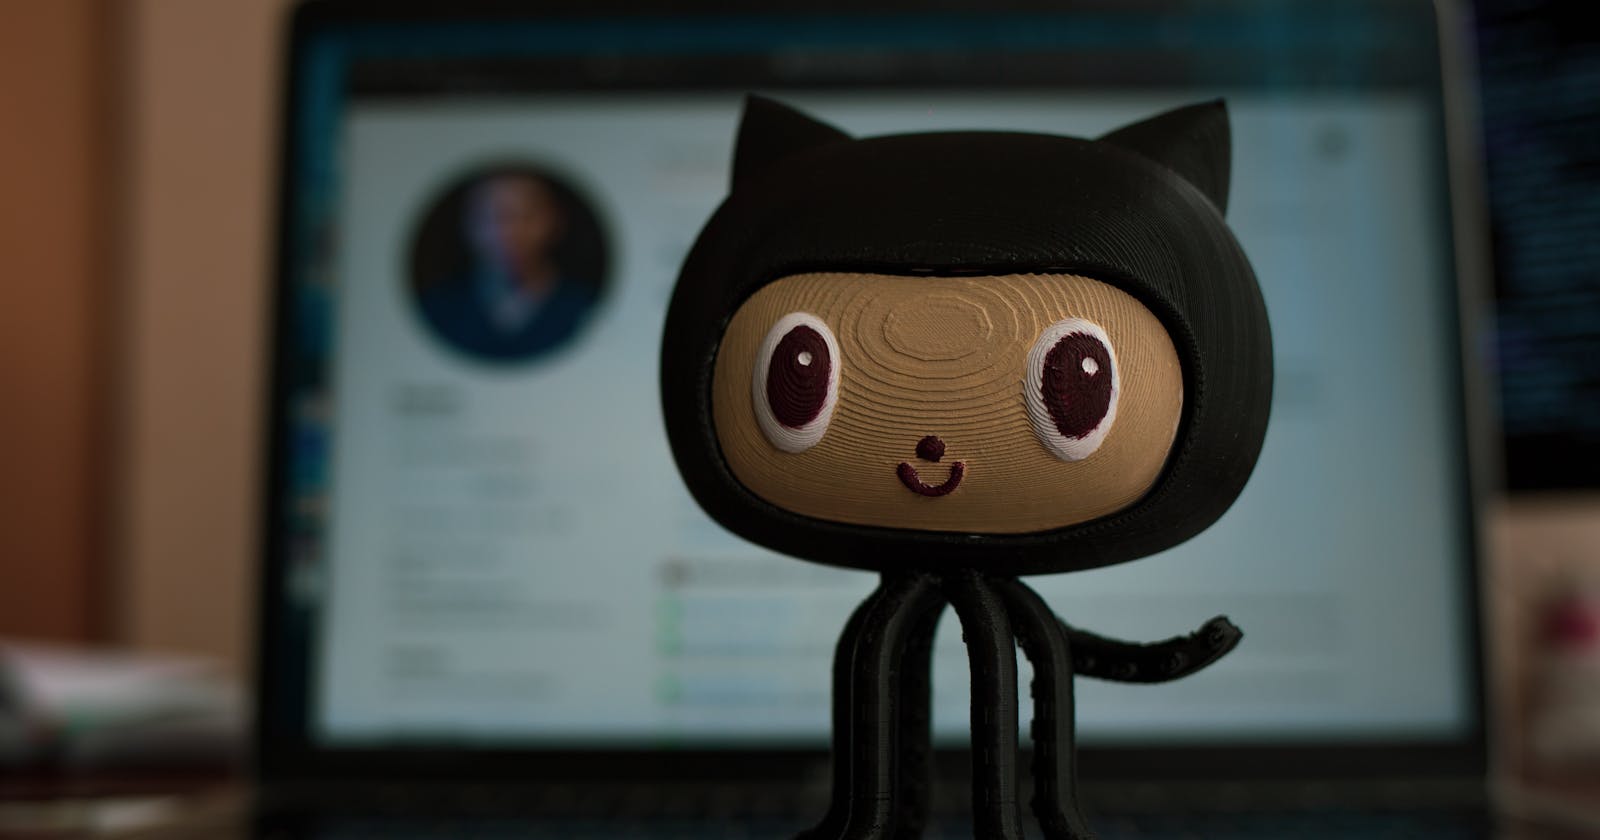 Part 1: An Introduction to Github